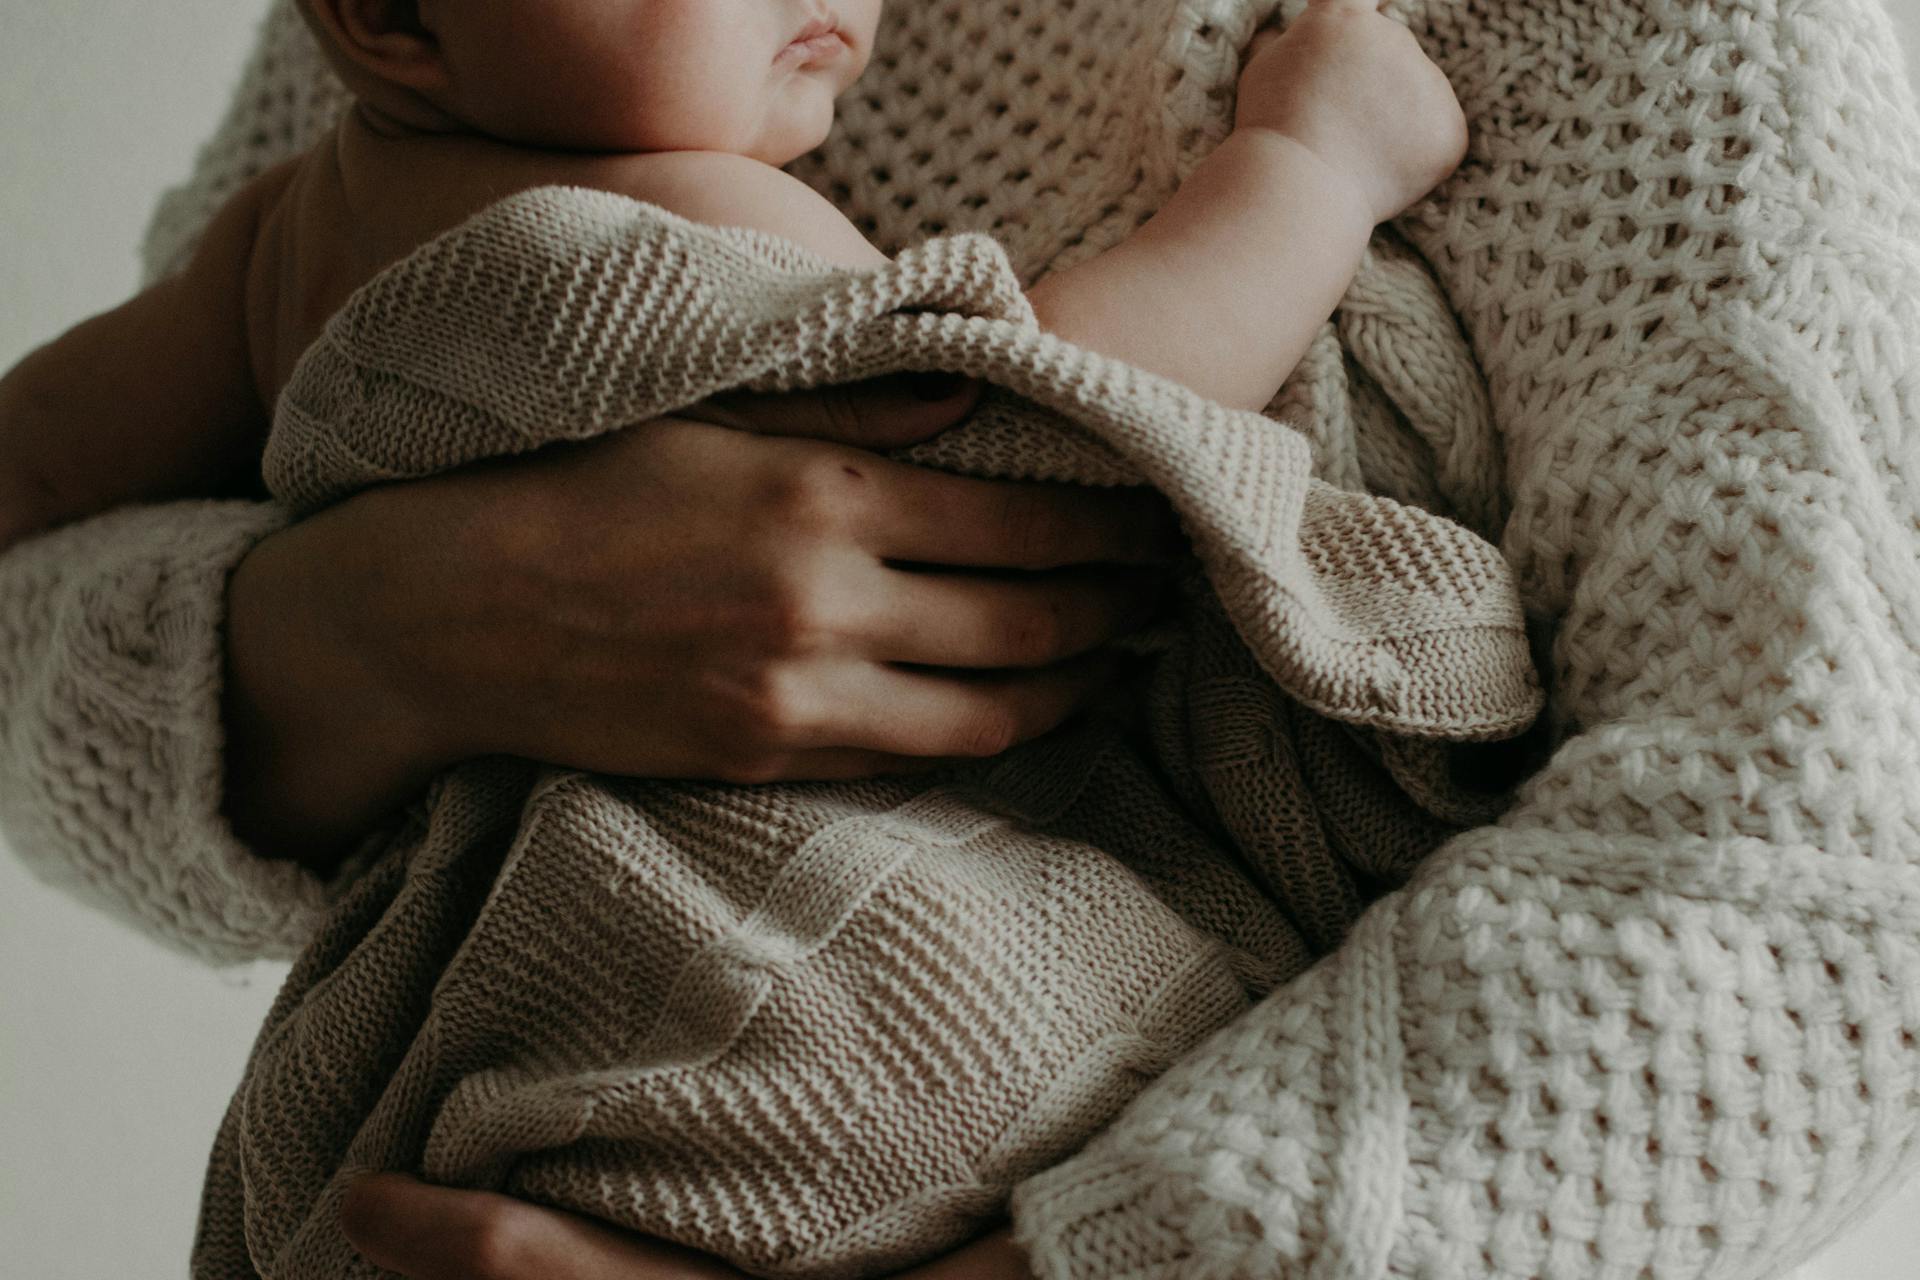 Person holding a baby | Source: Pexels